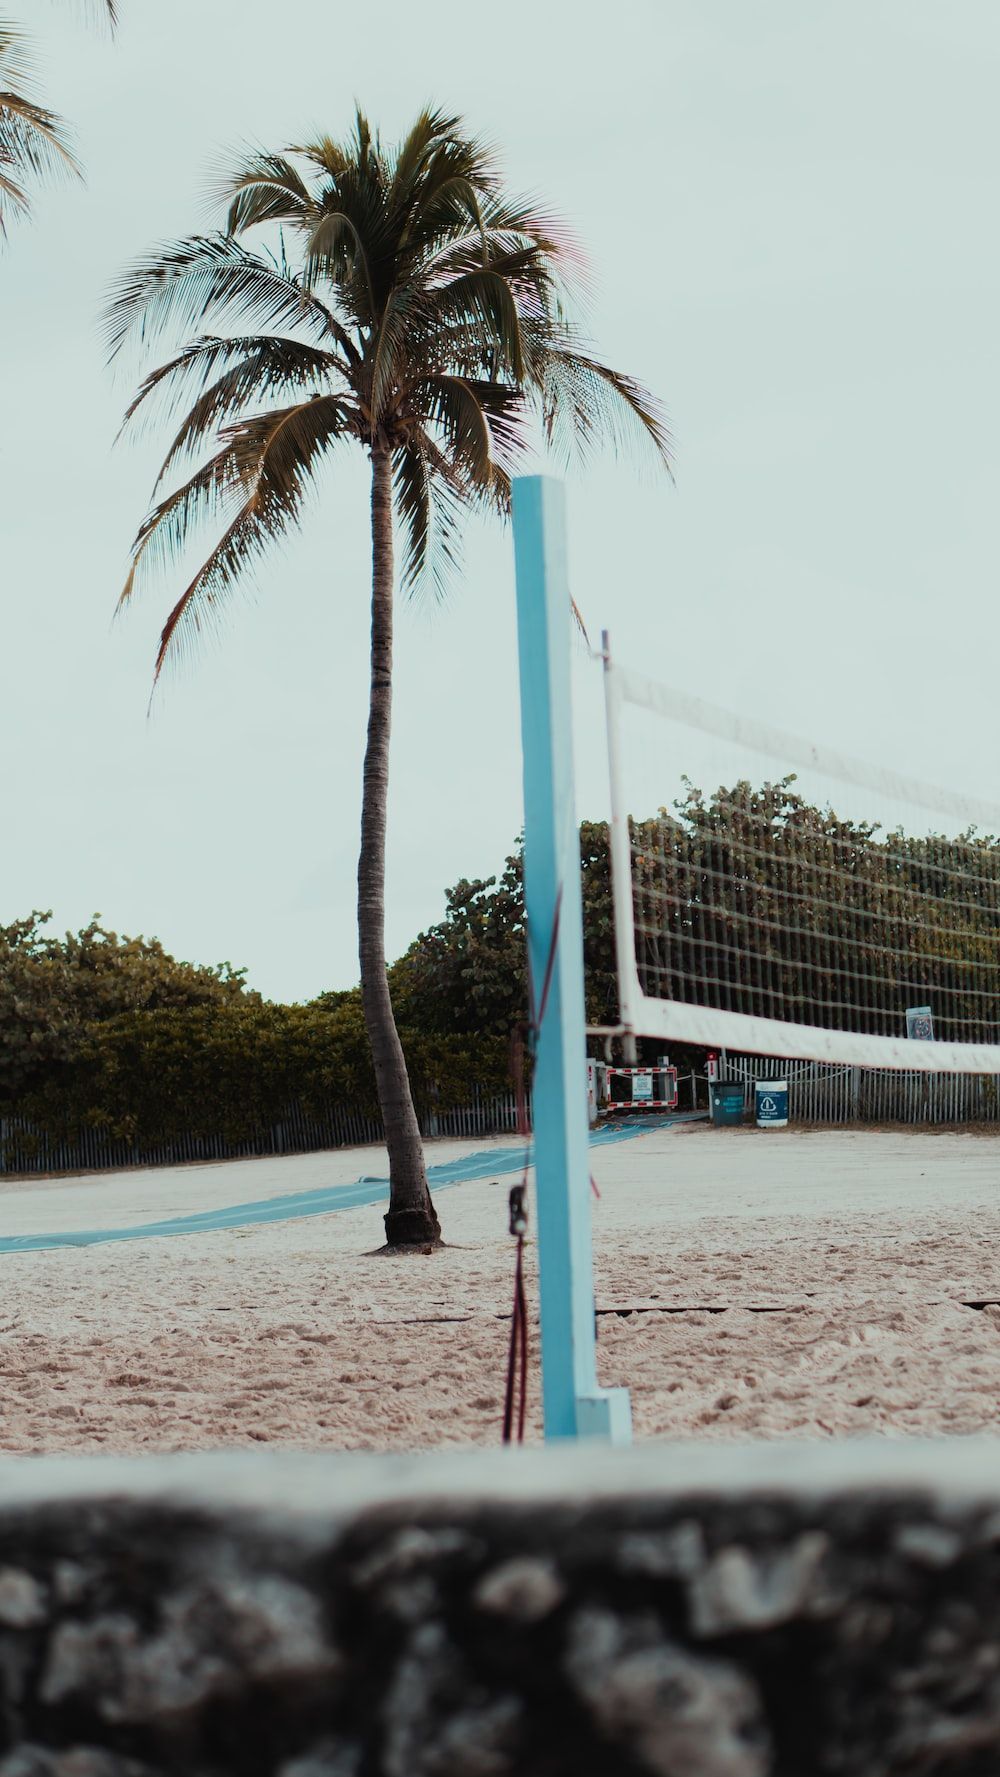 A volleyball net on a sandy beach with palm trees in the background. - Volleyball